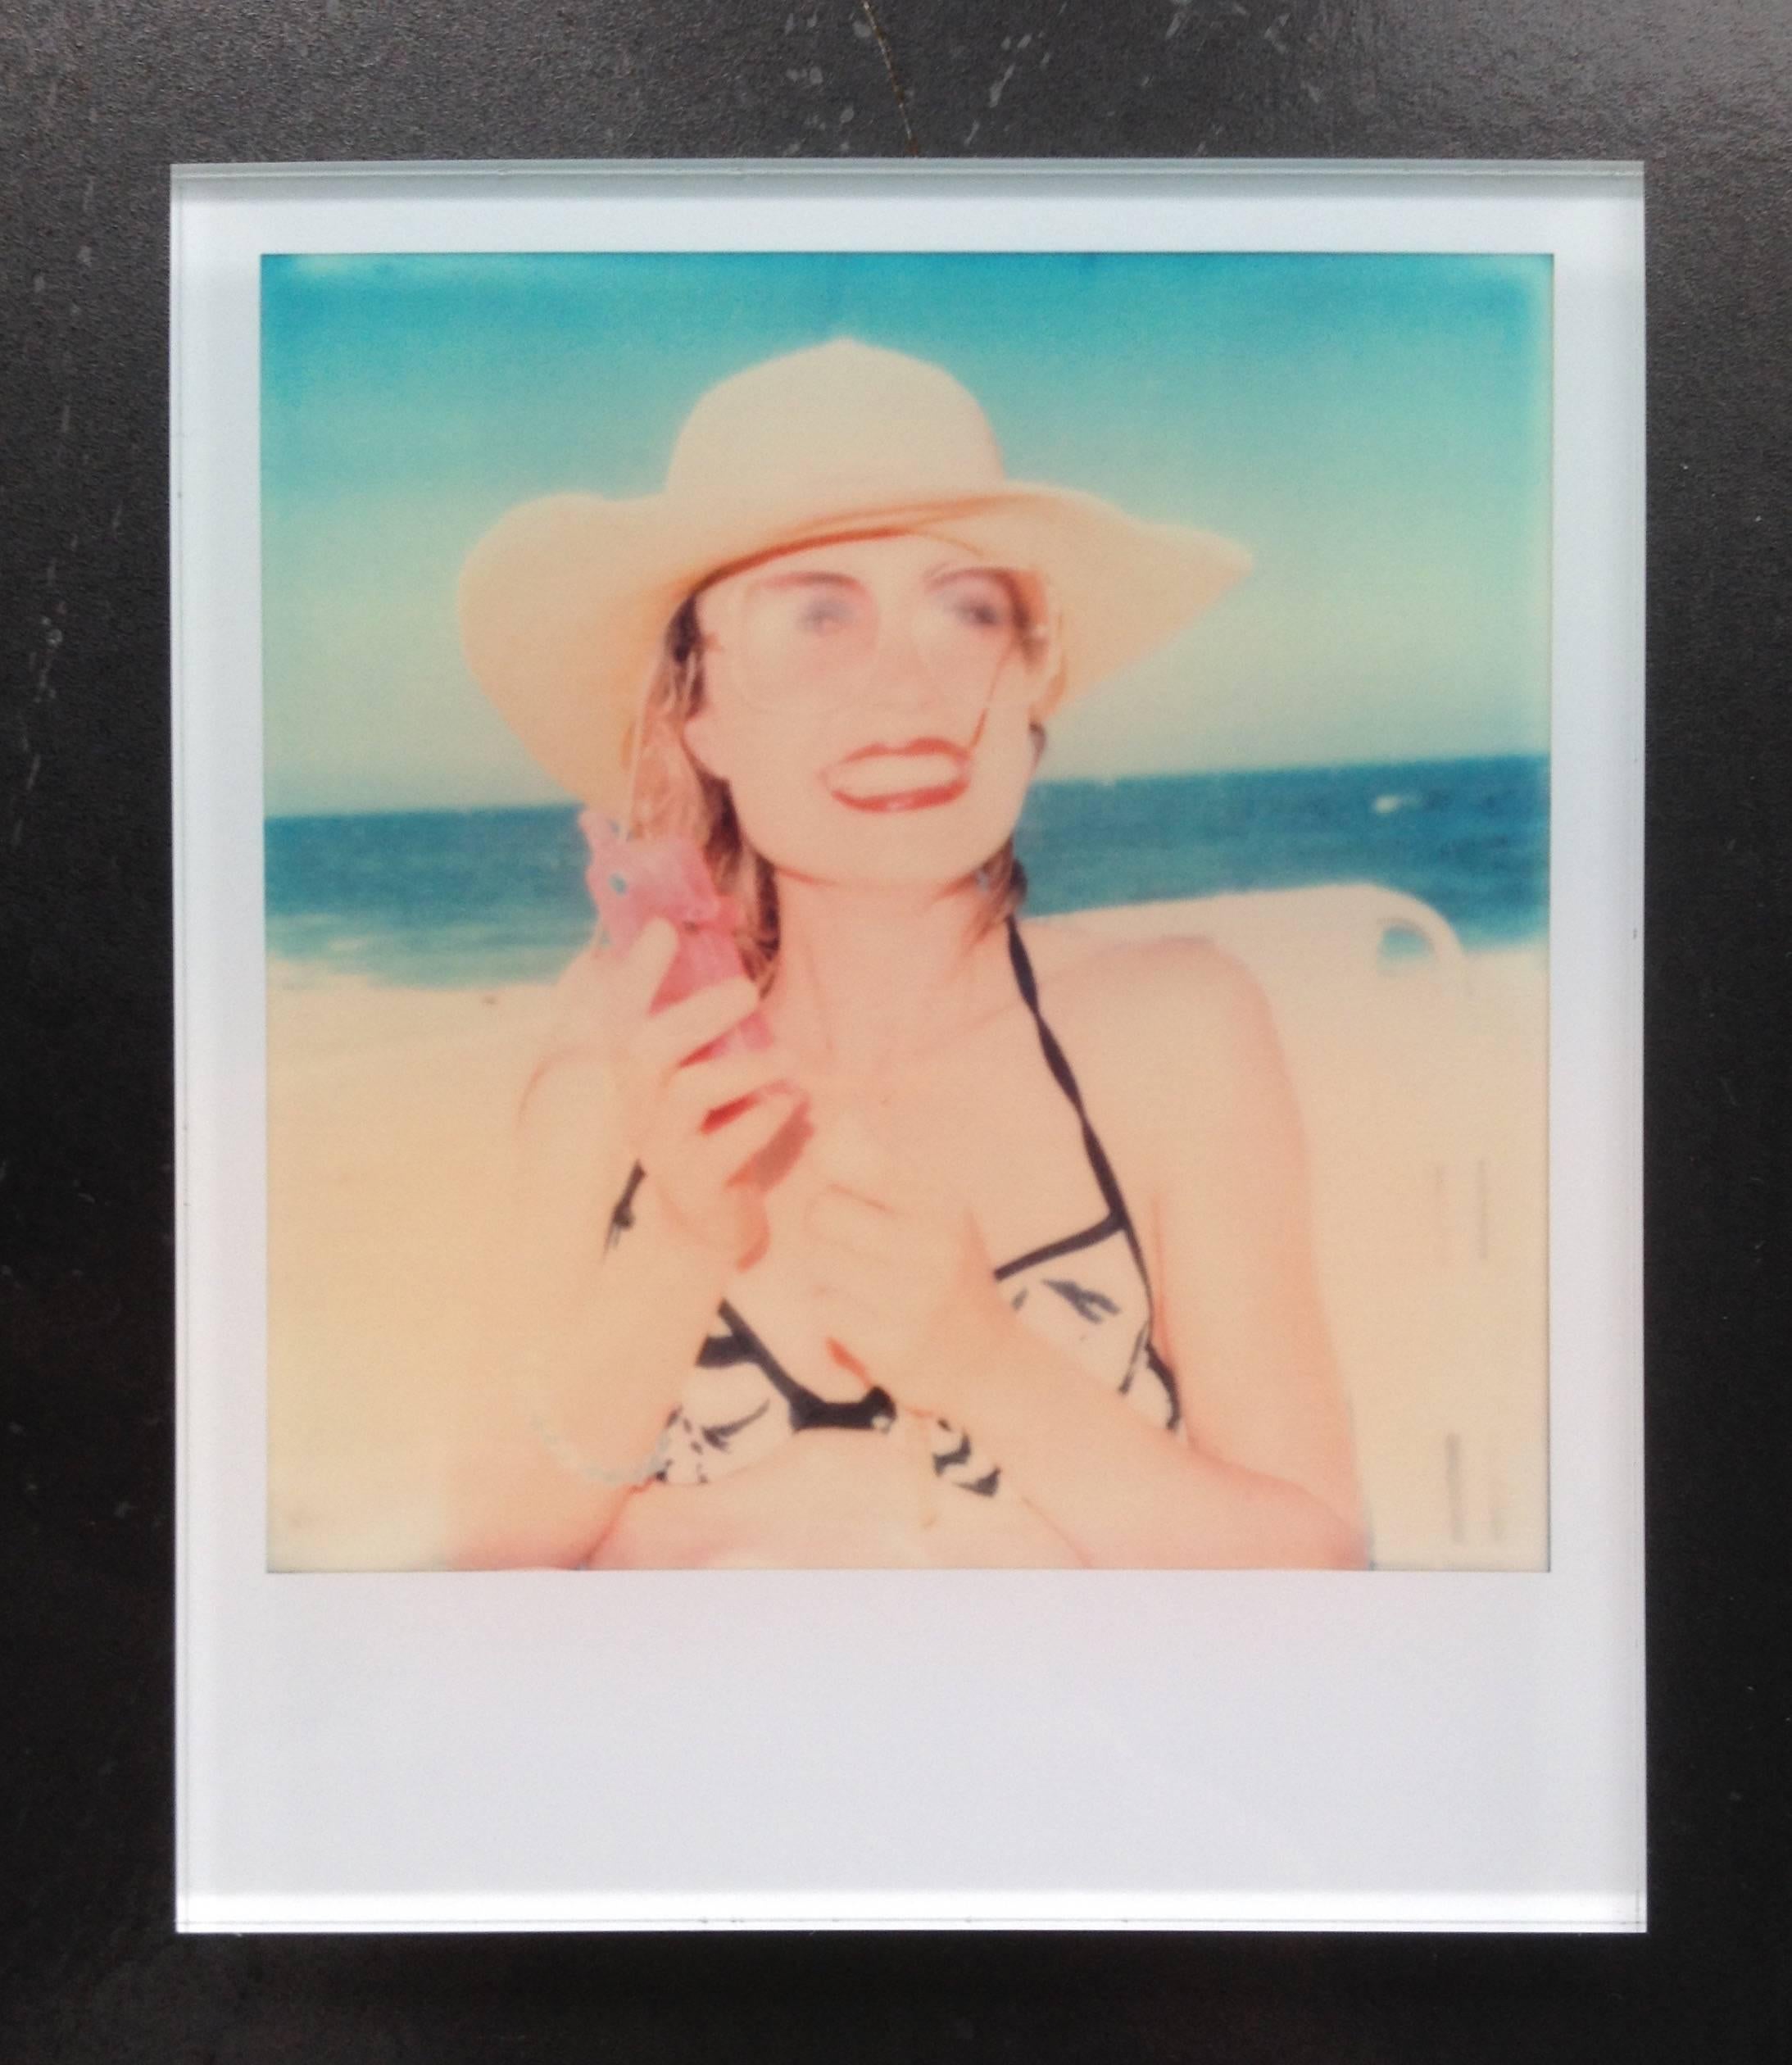 Stefanie Schneider's Minis
'Untitled #11' (Beachshoot) featuring Radha Mitchell, 2005
signed and signature brand on verso
Lambda digital Color Photographs based on a Polaroid

Polaroid sized open Editions 1999-2013
10.7 x 8.8cm (Image